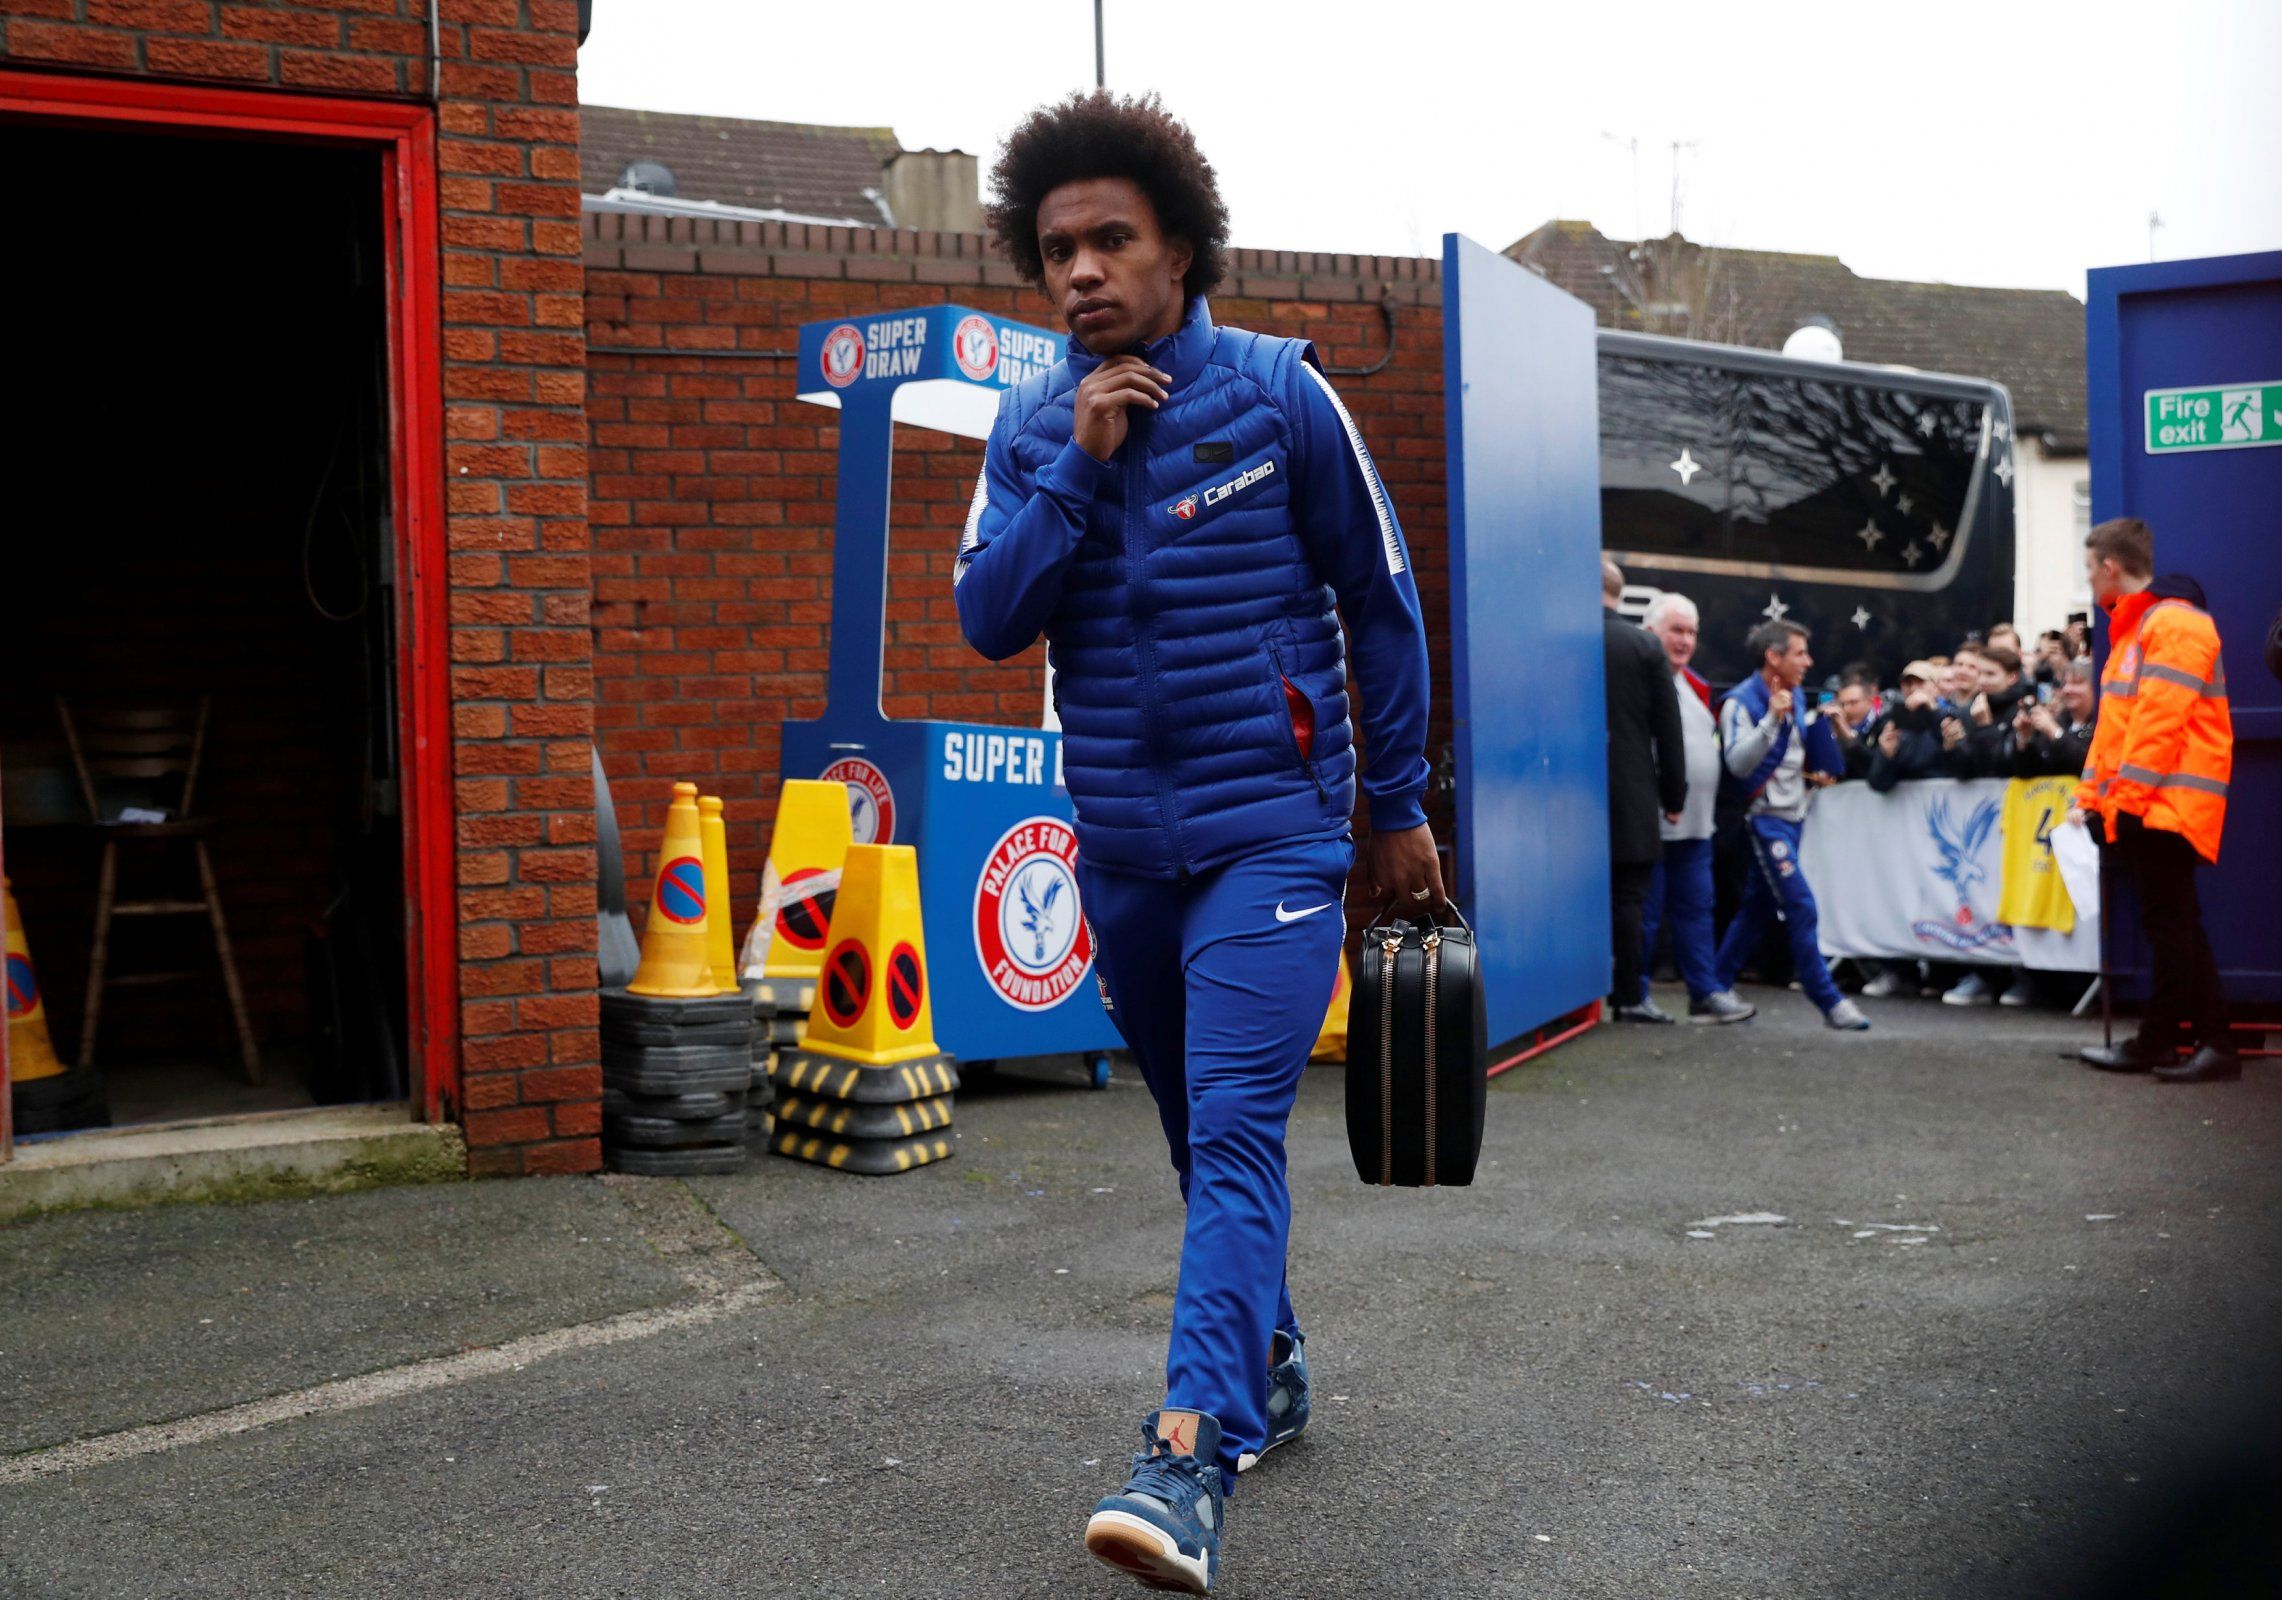 Chelsea's Willian arrives at Selhurst Park before the Crystal Palace match